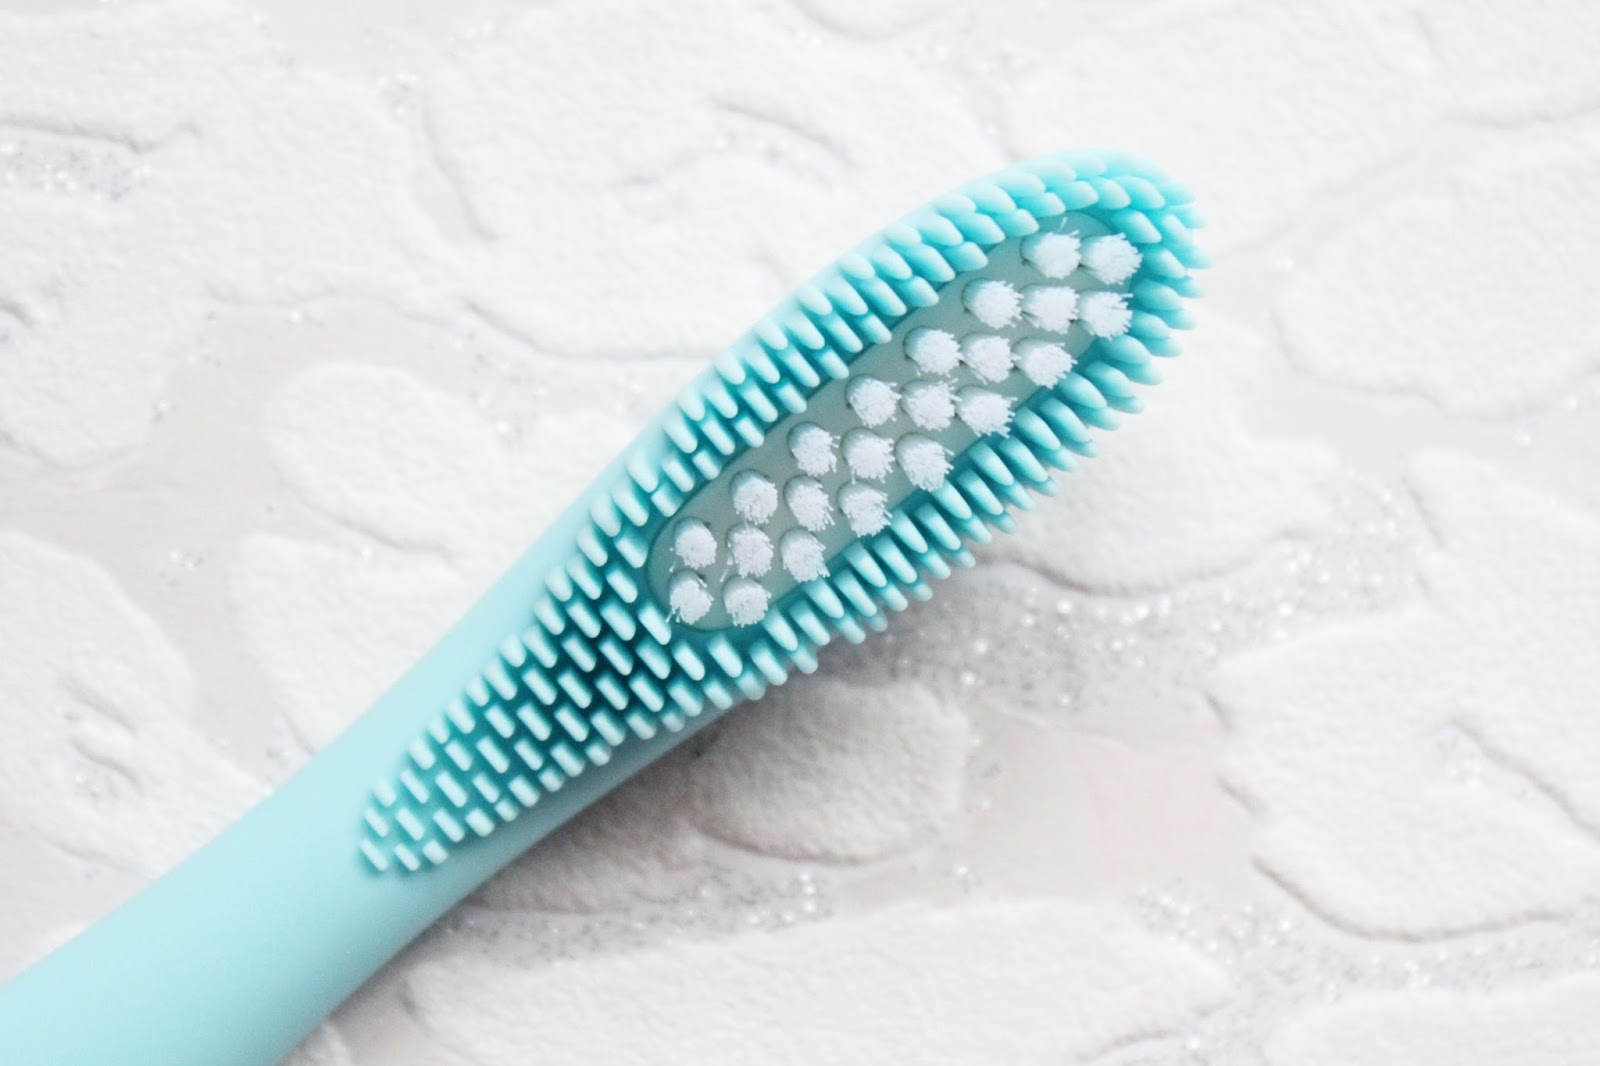 Foreo ISSA Sonic Electric Toothbrush